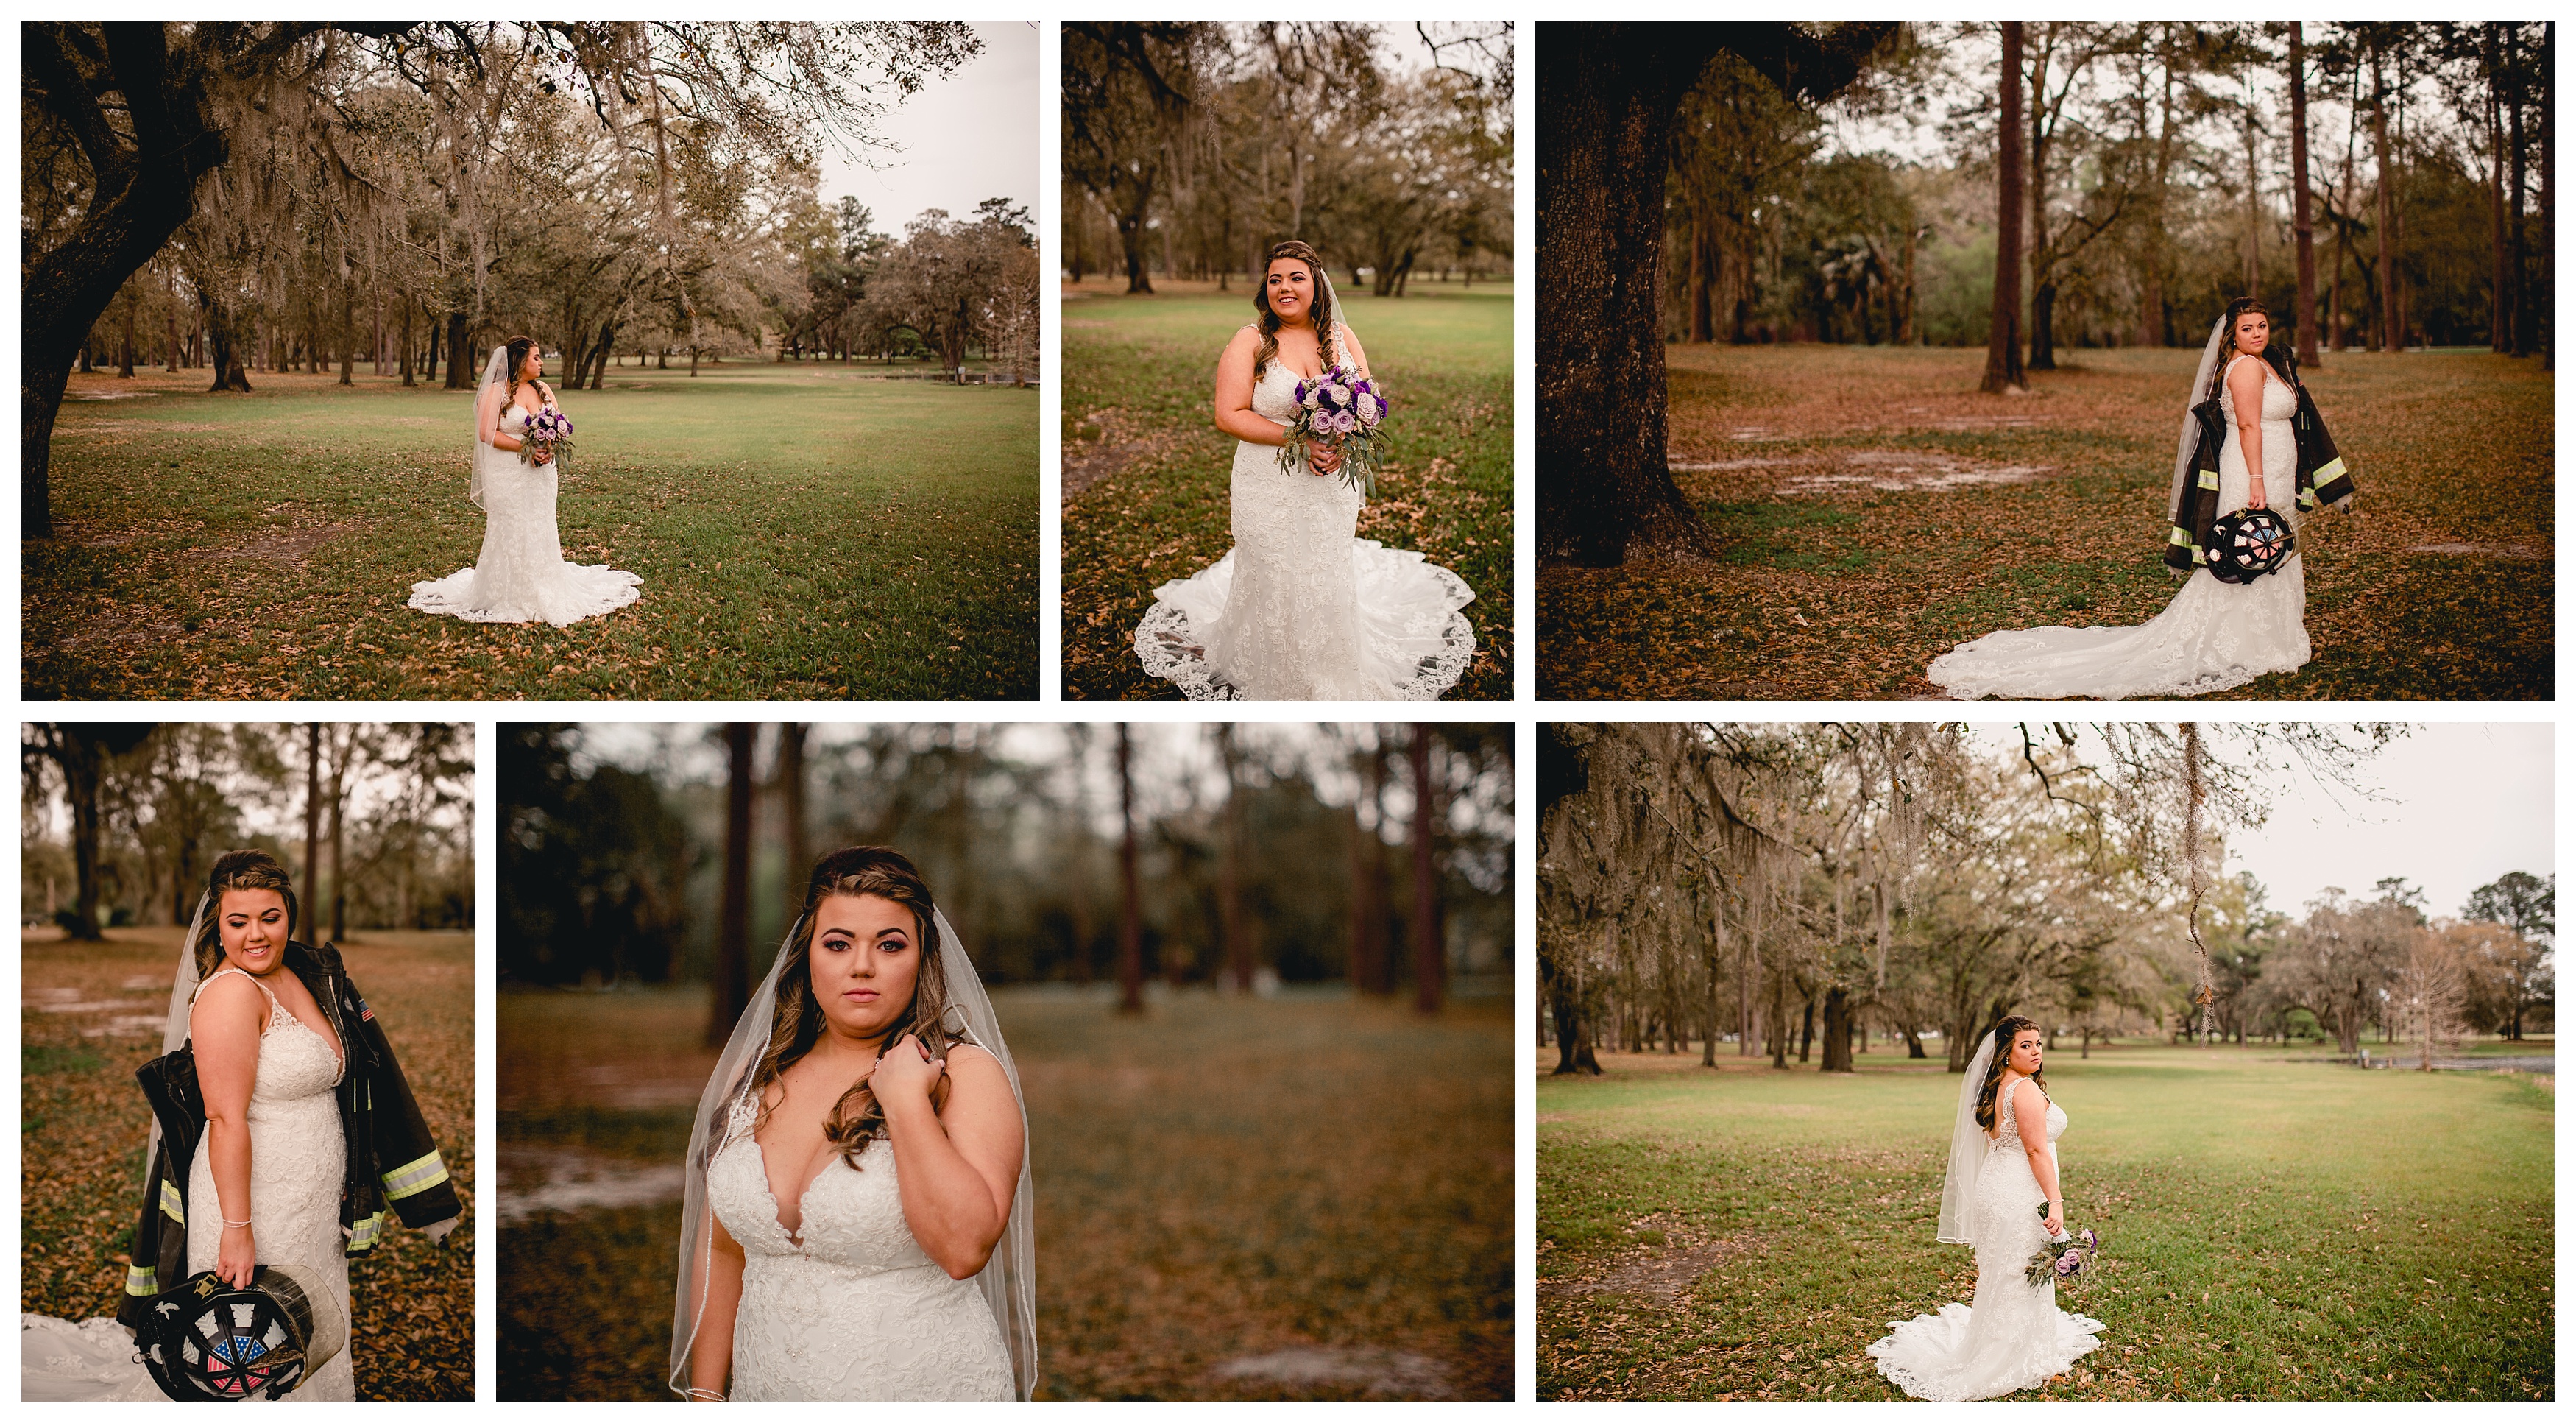 Bridal portraits of the bride on wedding day in Tally, fl. Shelly Williams Photography